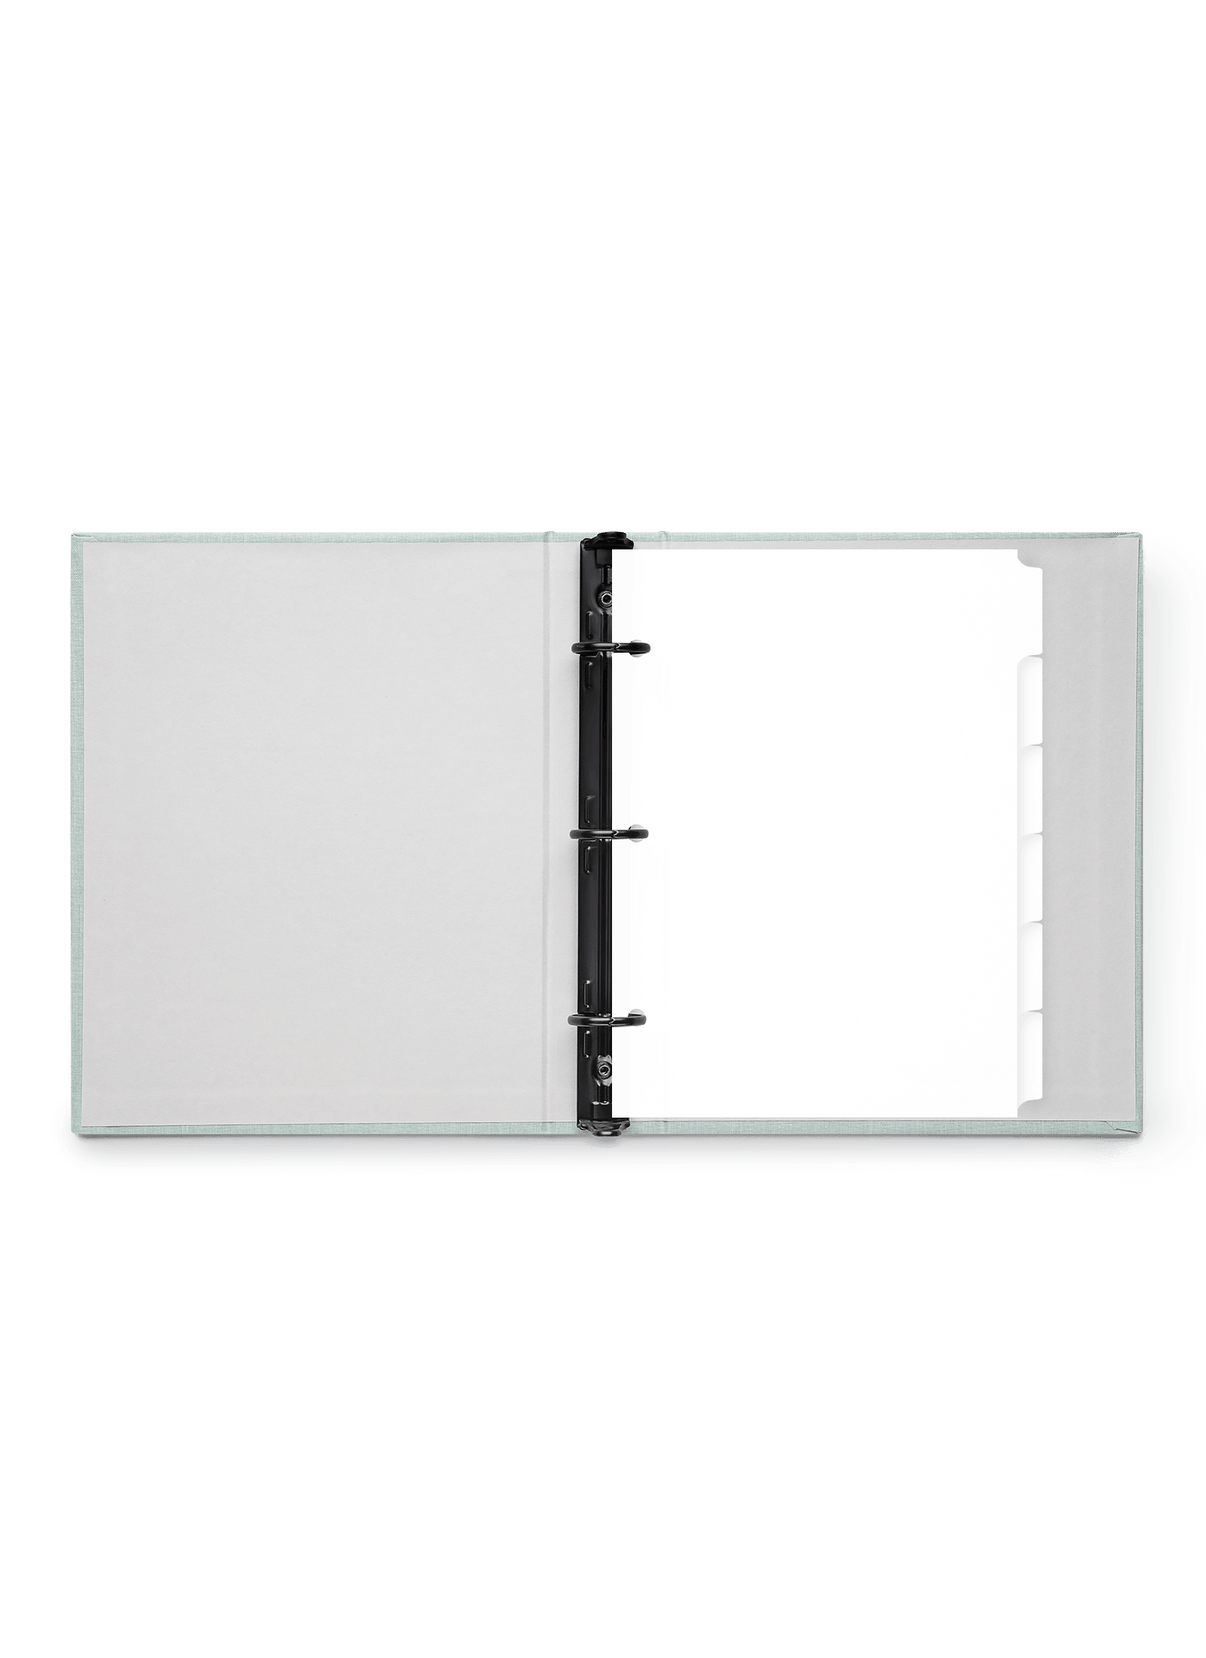 Index Card Binder, Personalized Note Organizer With Tab Dividers